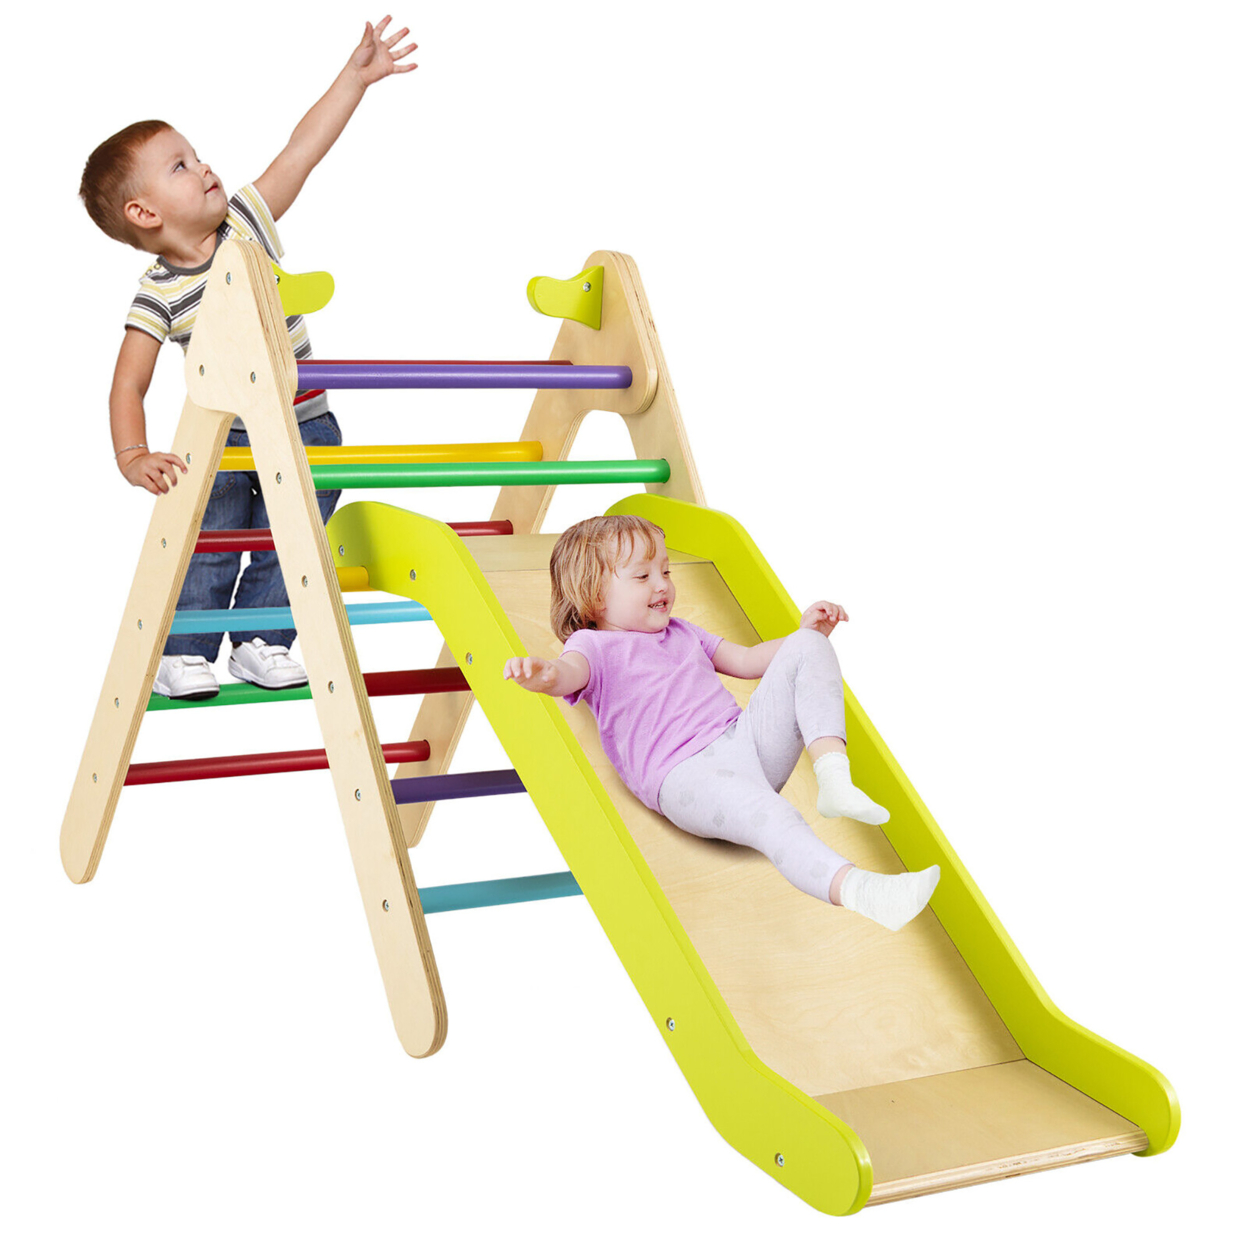 2-in-1 Wooden Climbing Triangle Set Triangle Climber W/ Ramp - Multi-color